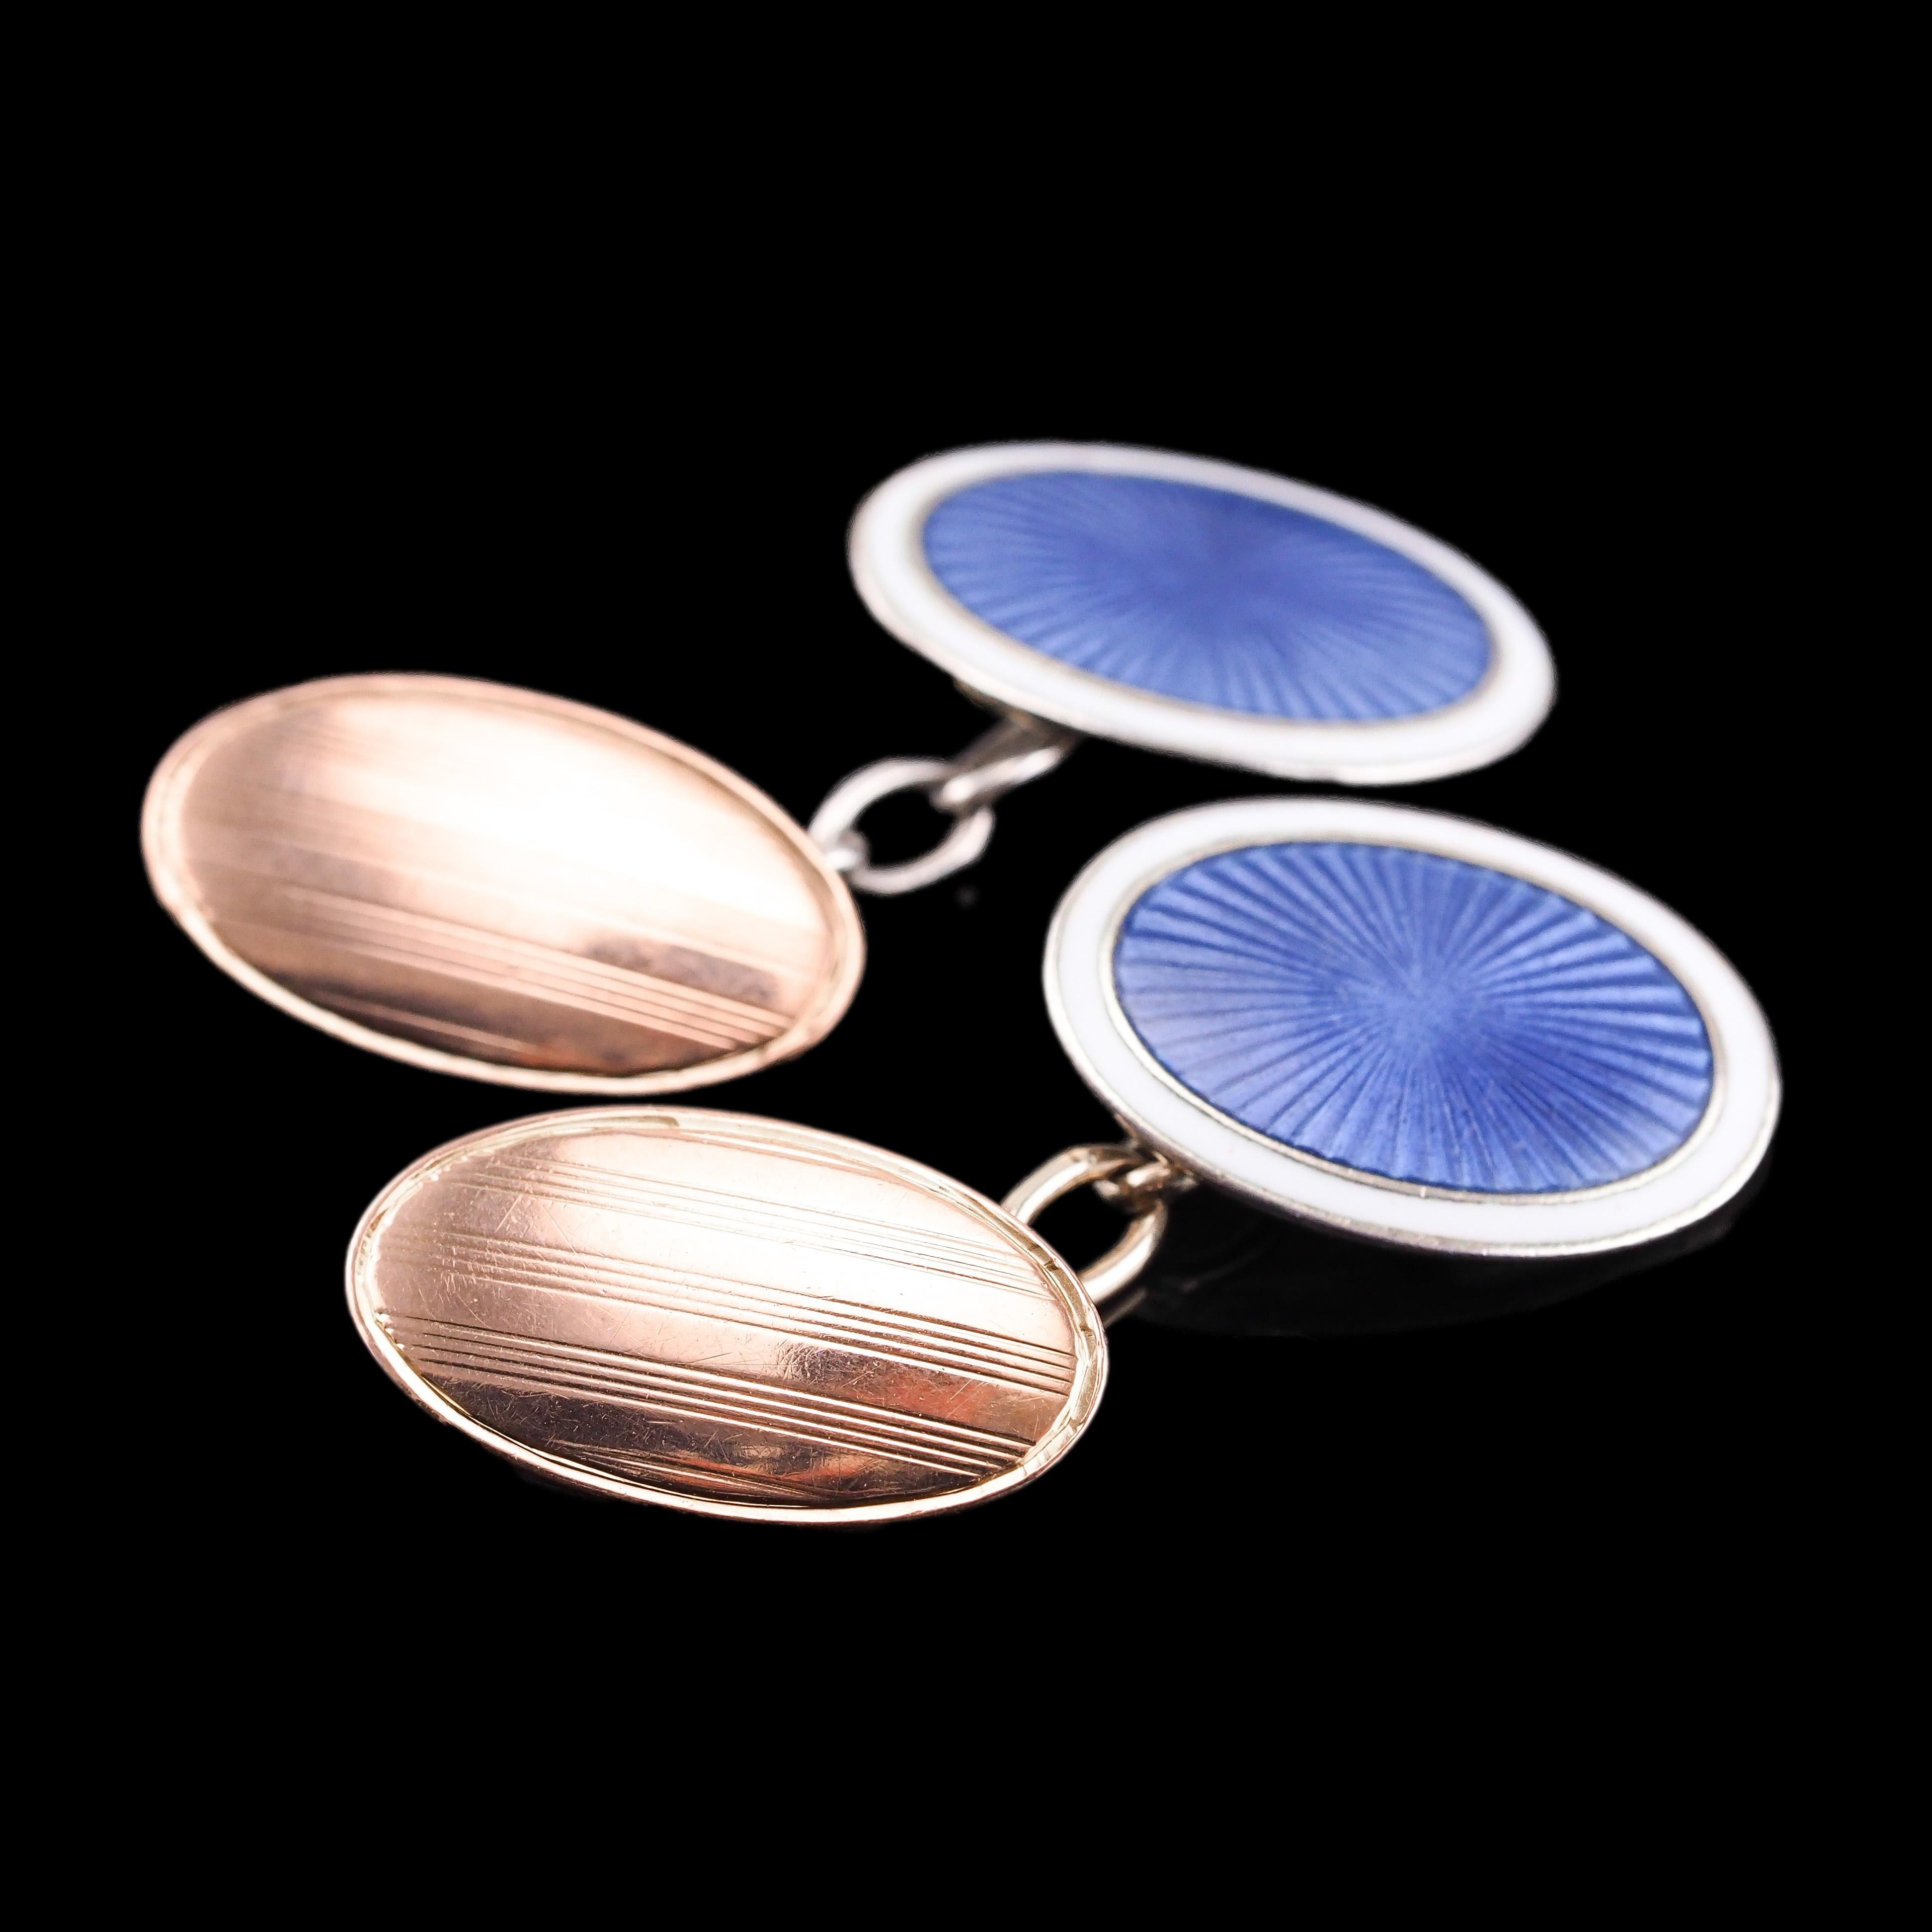 We are delighted to offer this marvellous pair of antique gold and silver cufflinks with a wonderful combined design of a rose gold panel and silver-blue sunburst guilloche enamel.

The rose gold portion features a modest yet elegant reeded stripe